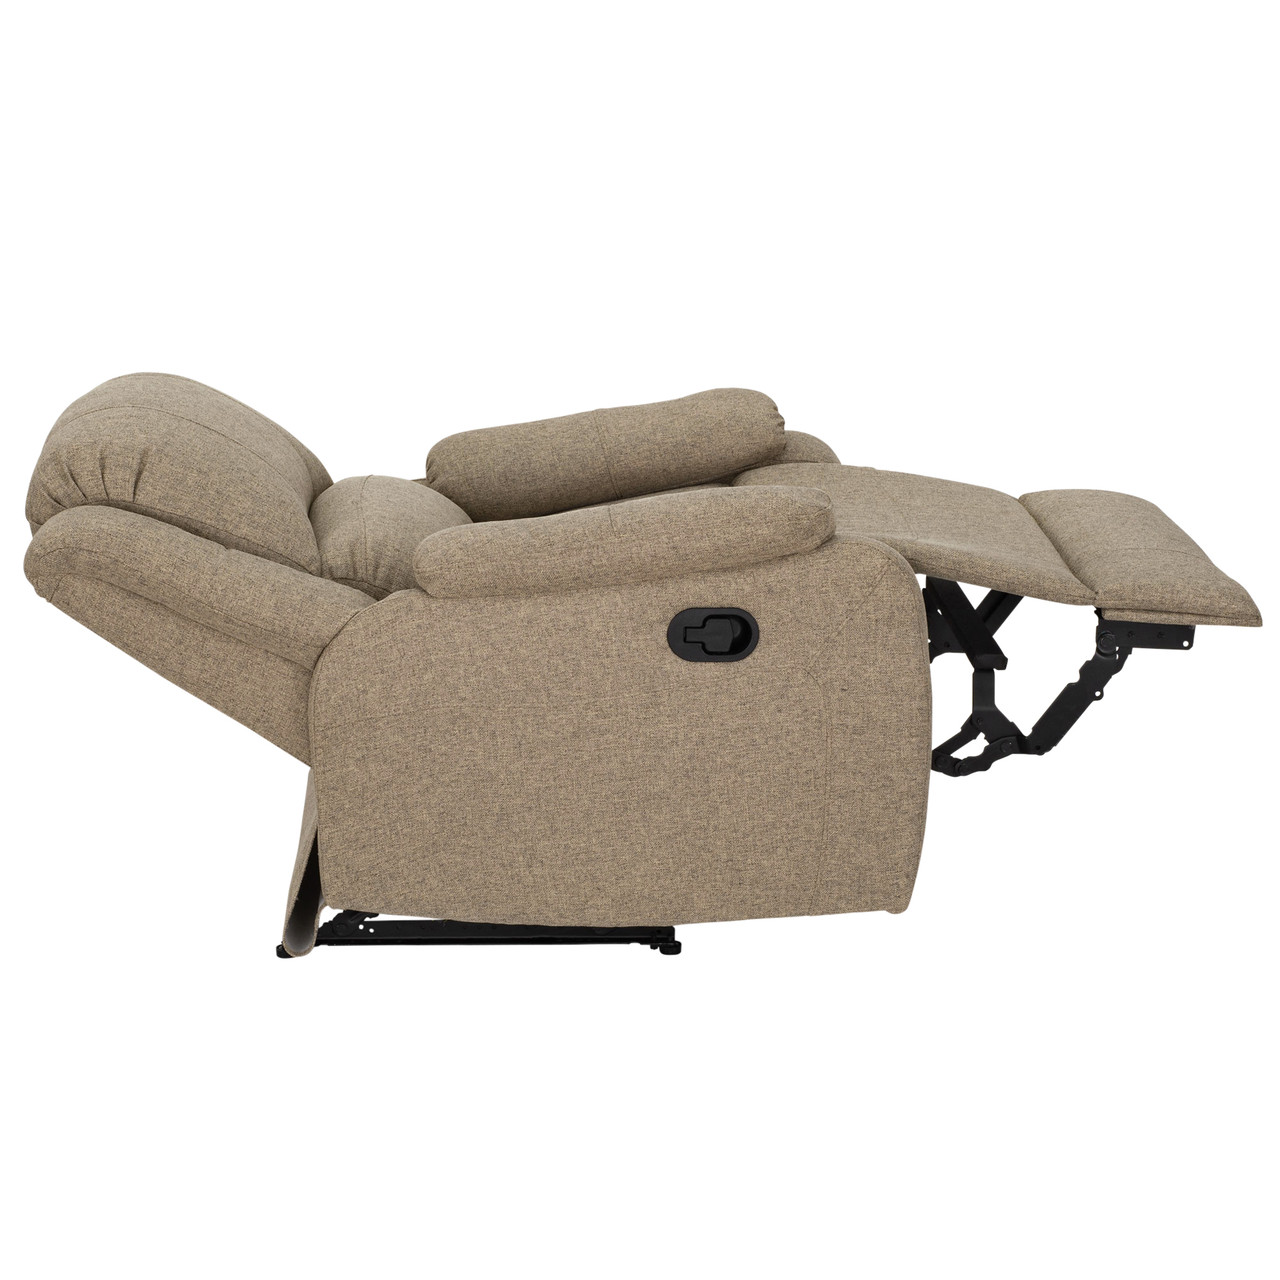 rv wall hugger recliners Recpro charles 30